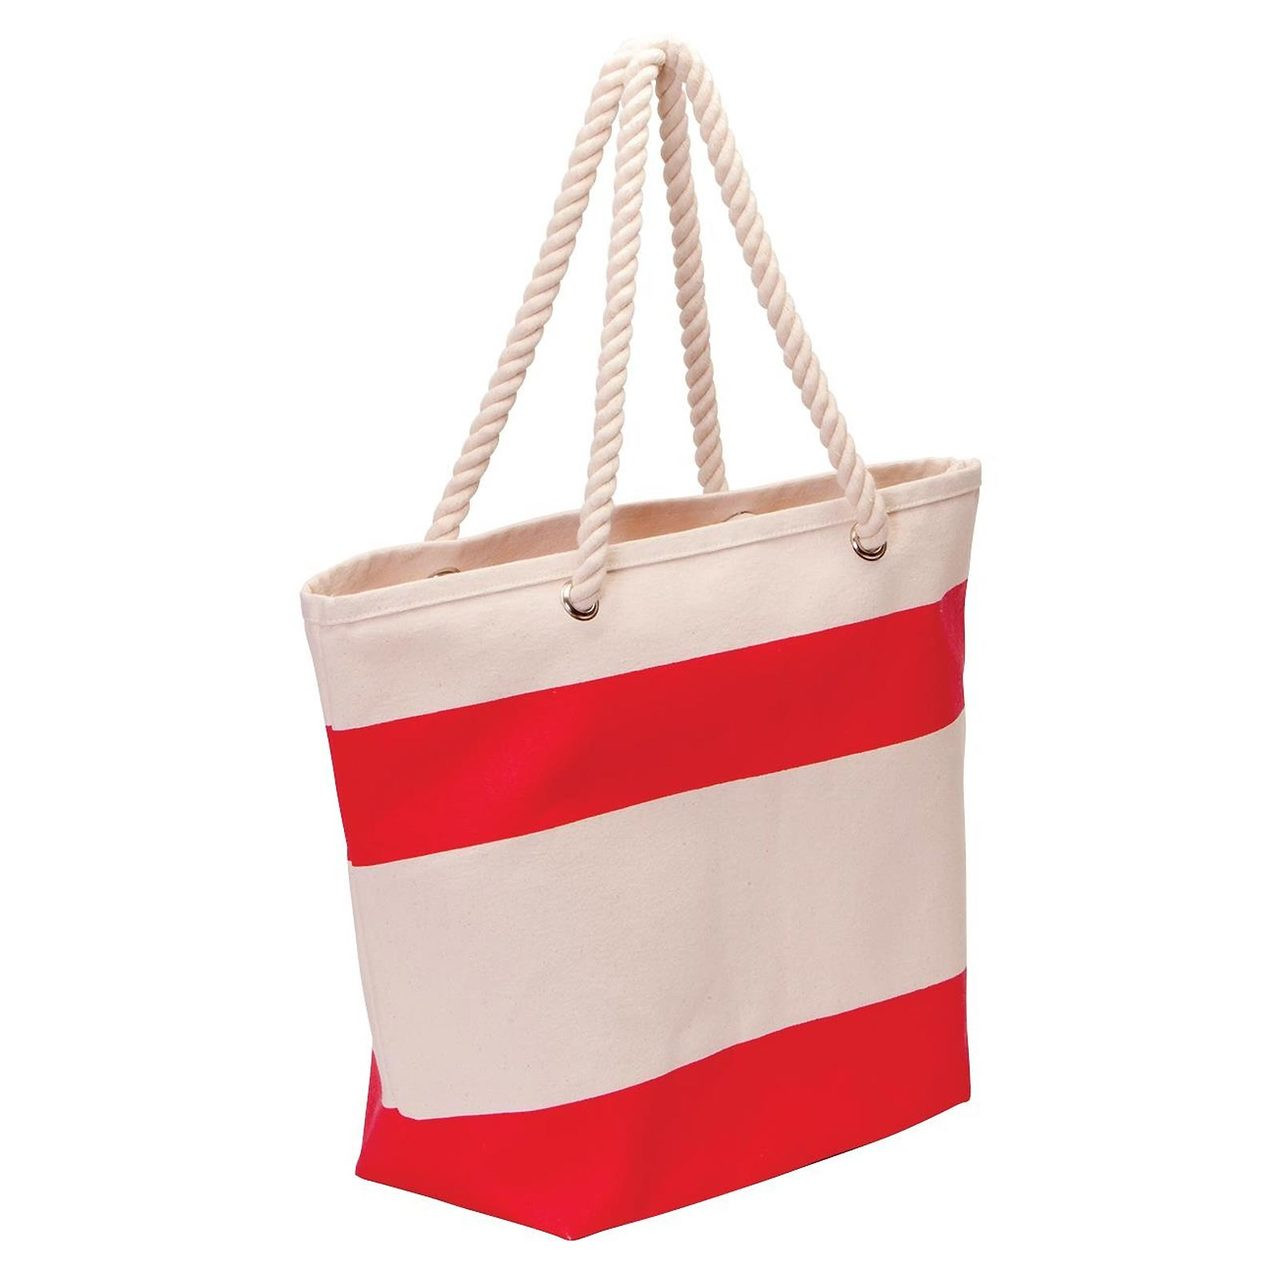 Cotton Canvas Tote with Rope Handle - Buy Online Wholesale Plain Bags